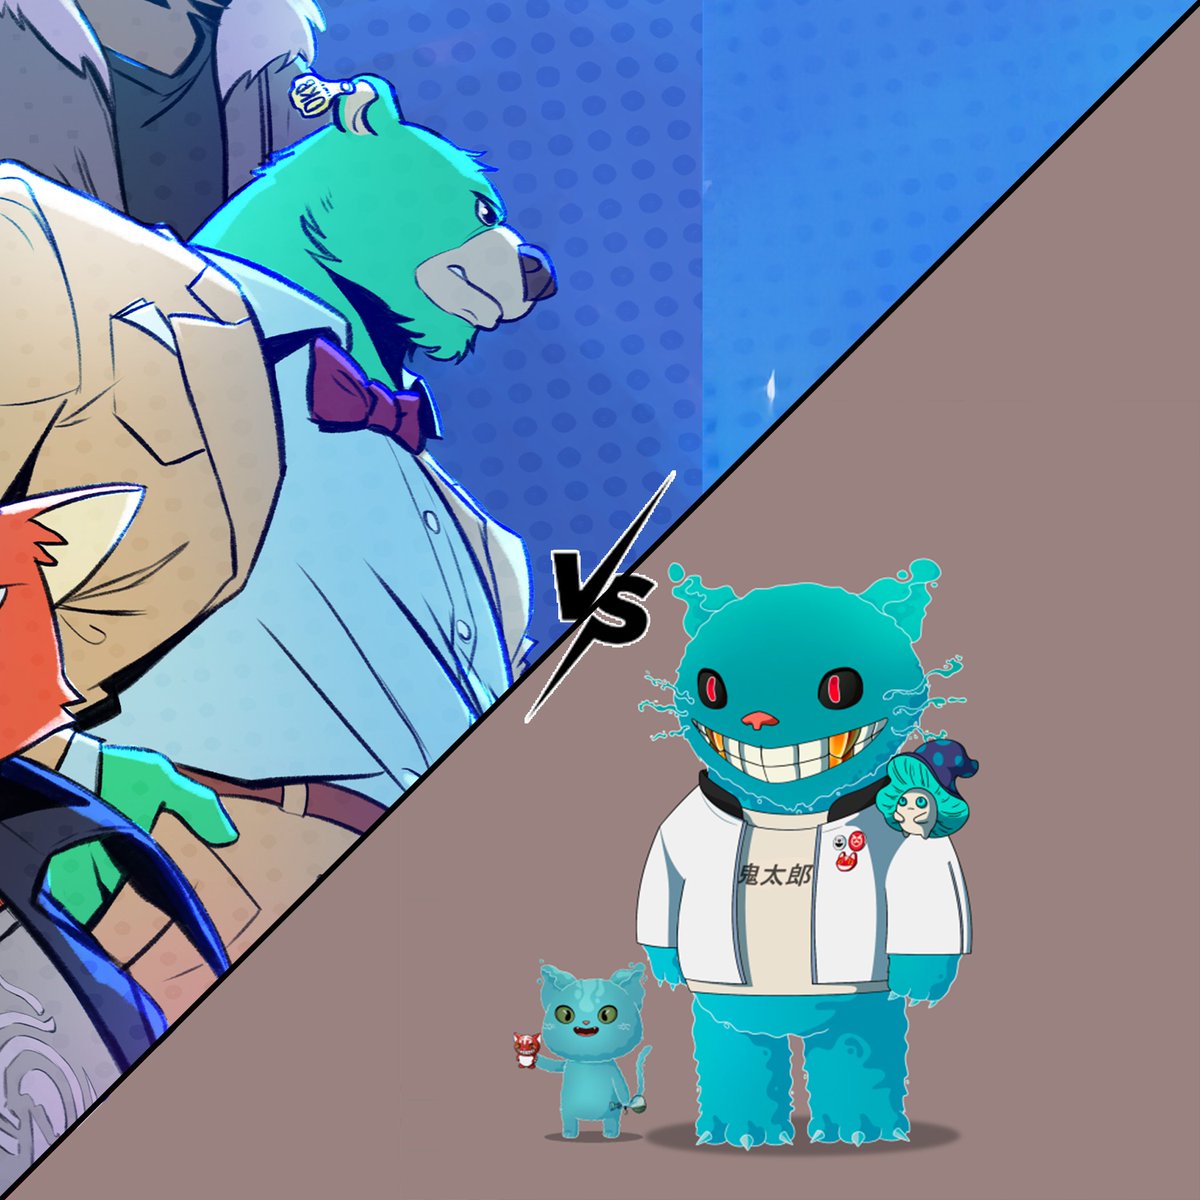 The tension is palpable as we head into the final match of the round! In this epic showdown, it's @DomoKitaro and his powerful @KitaroStudios taking on @thevoiceofcash and his loyal @okaybears! Your vote decides who secures the last spot in the championship showdown!